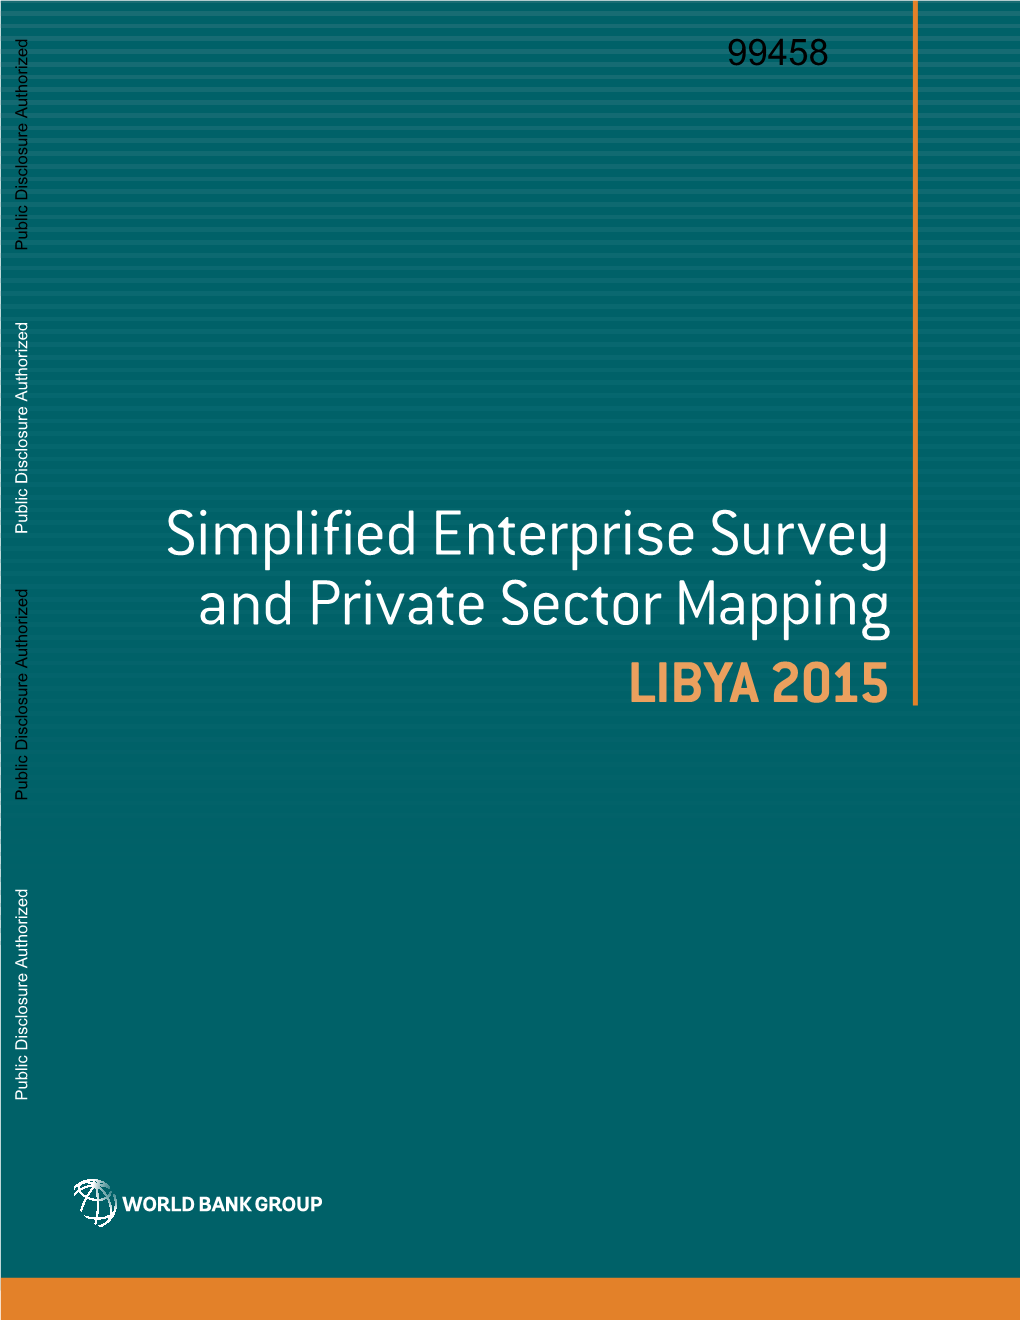 Simplified Enterprise Survey and Private Sector Mapping Libya 2015 Public Disclosure Authorized Public Disclosure Authorized